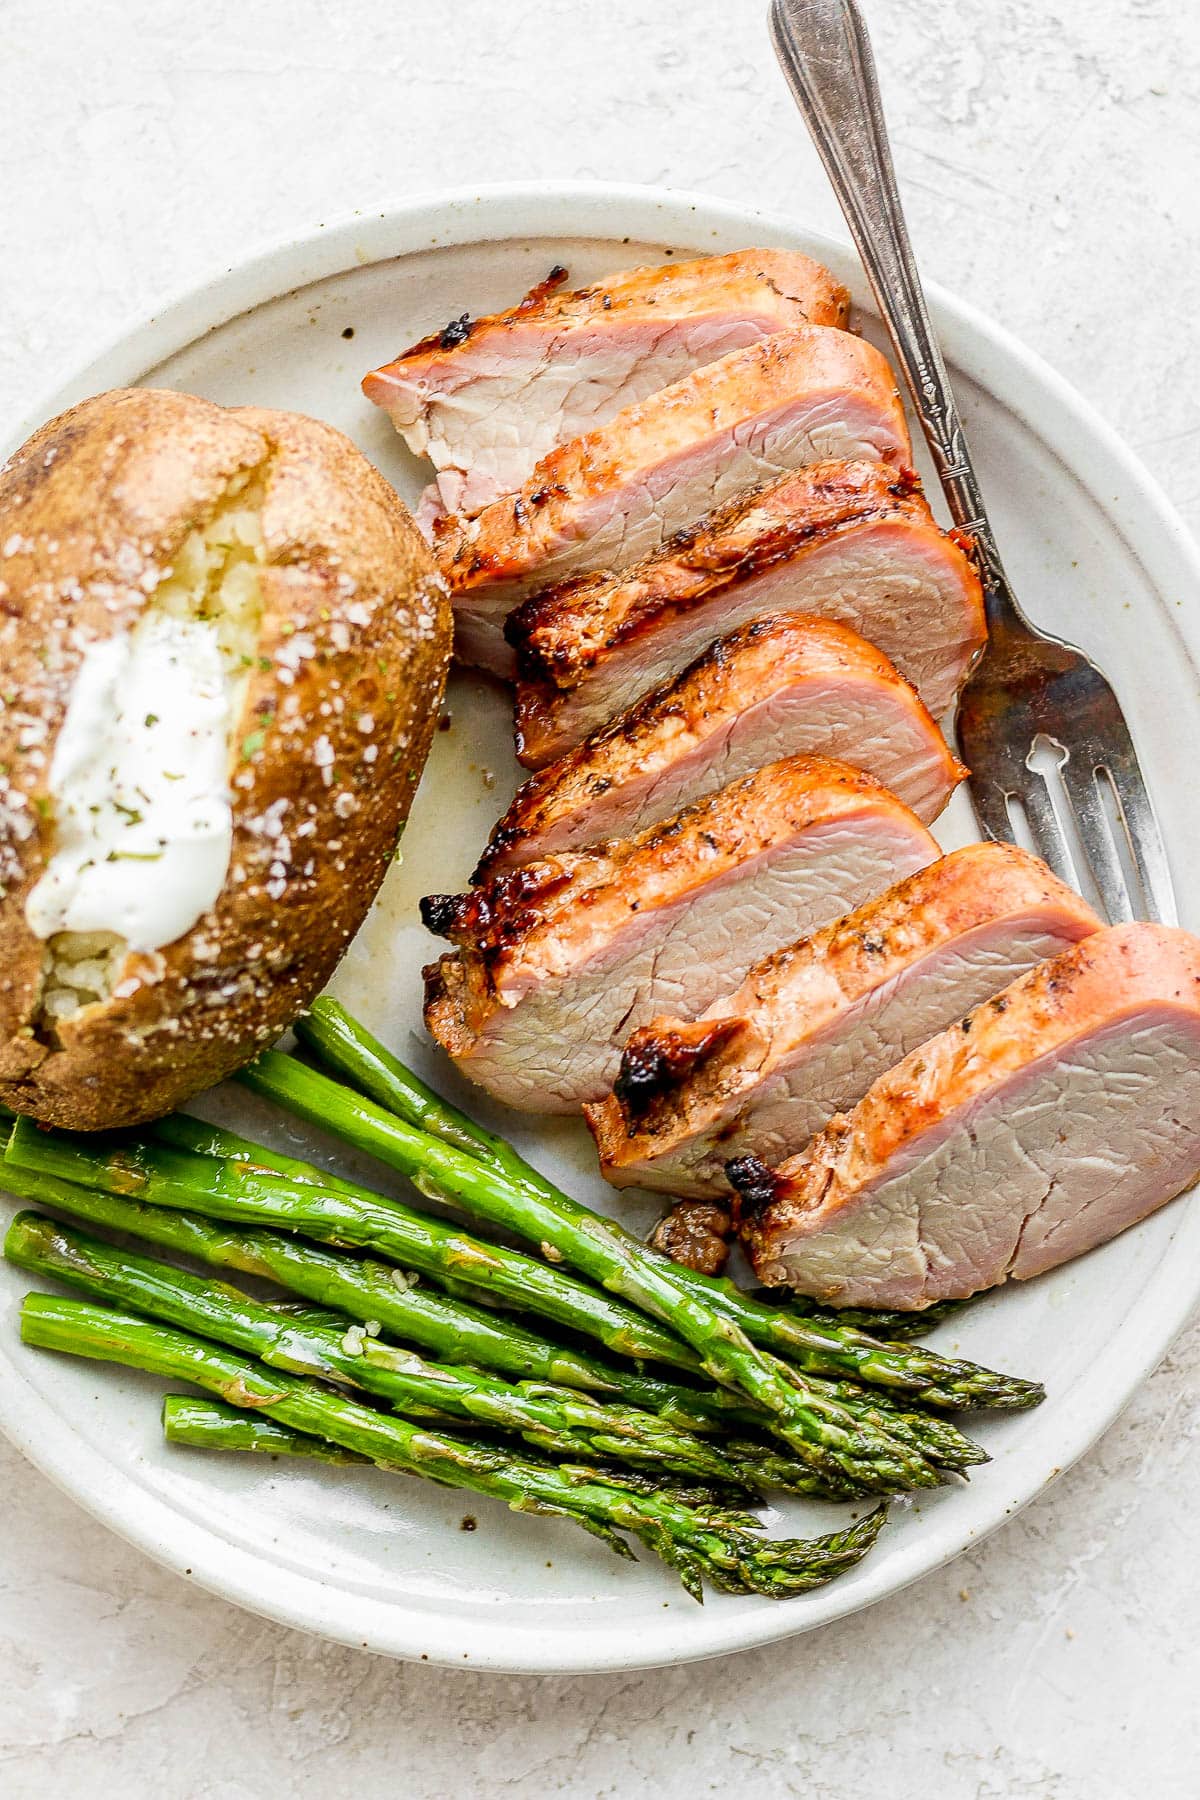 A plate of sliced smoked pork tenderloin with asparagus and a baked potato. 